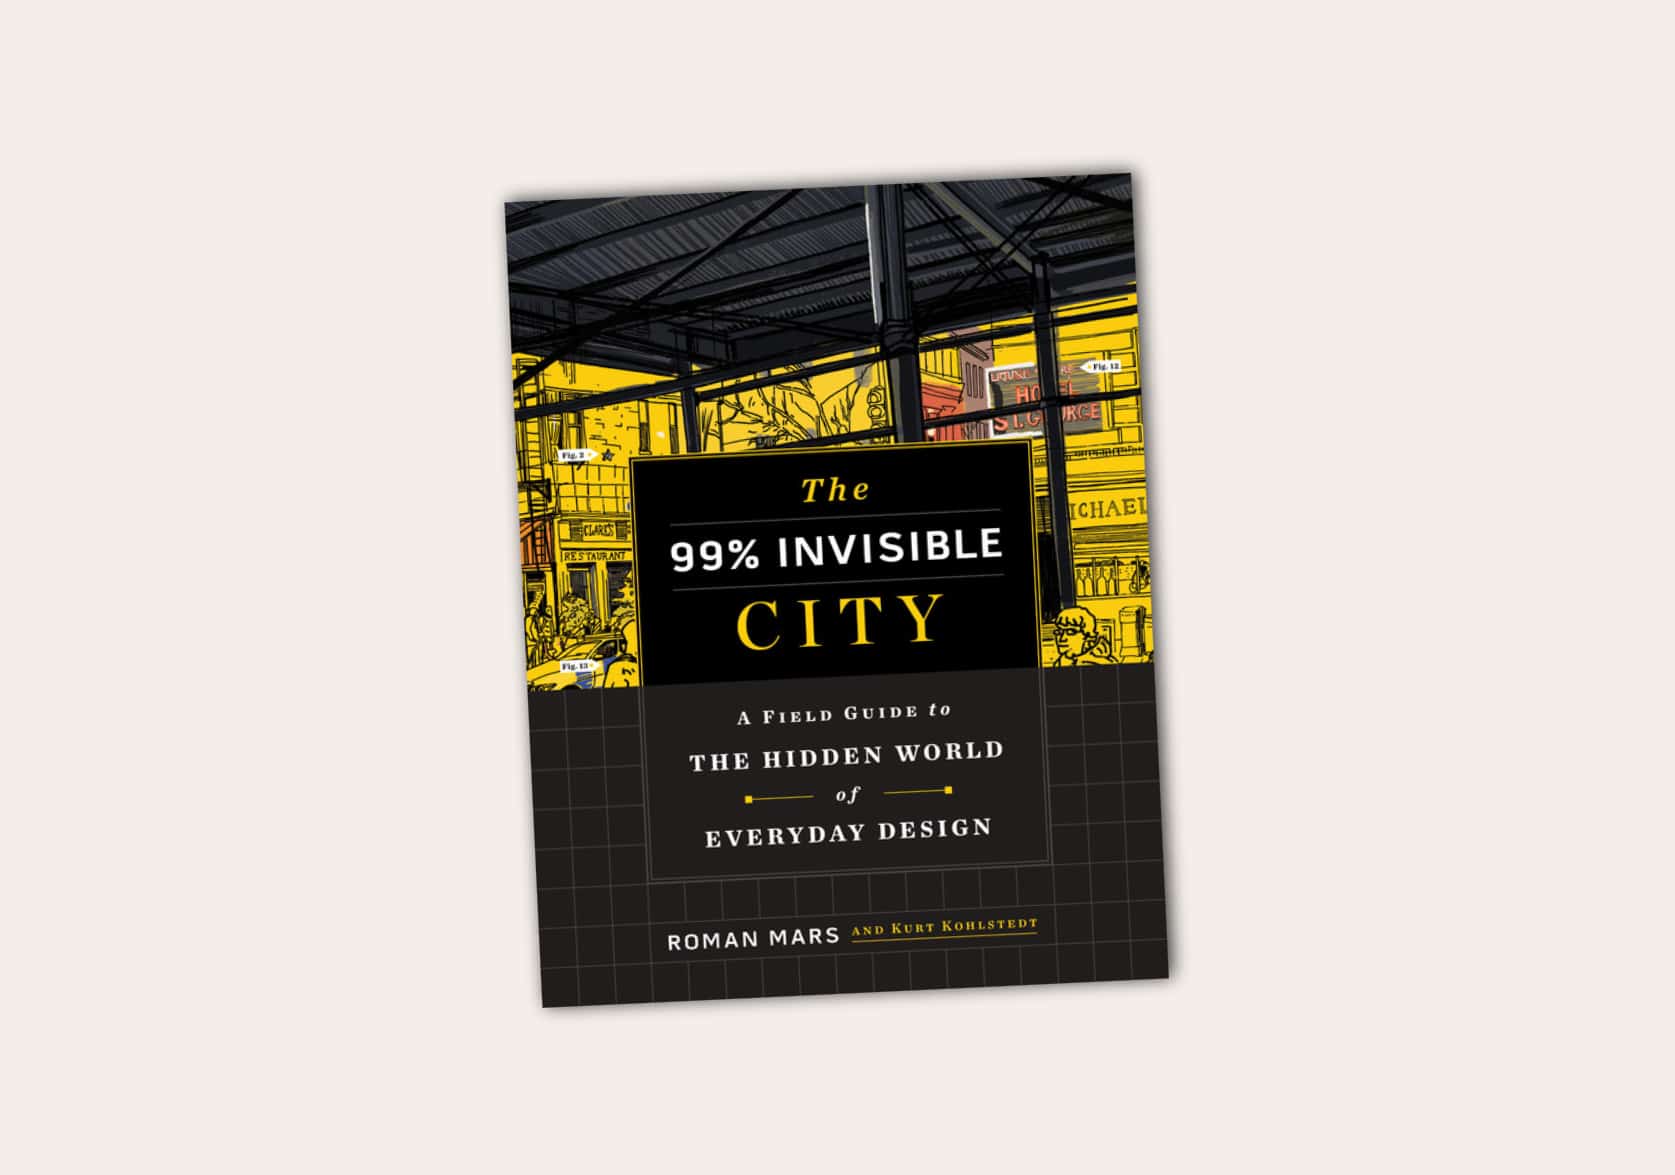 The 99% Invisible City: A Field Guide to the Hidden World of Everyday Design by Roman Mars and Kurt Kohlstedt